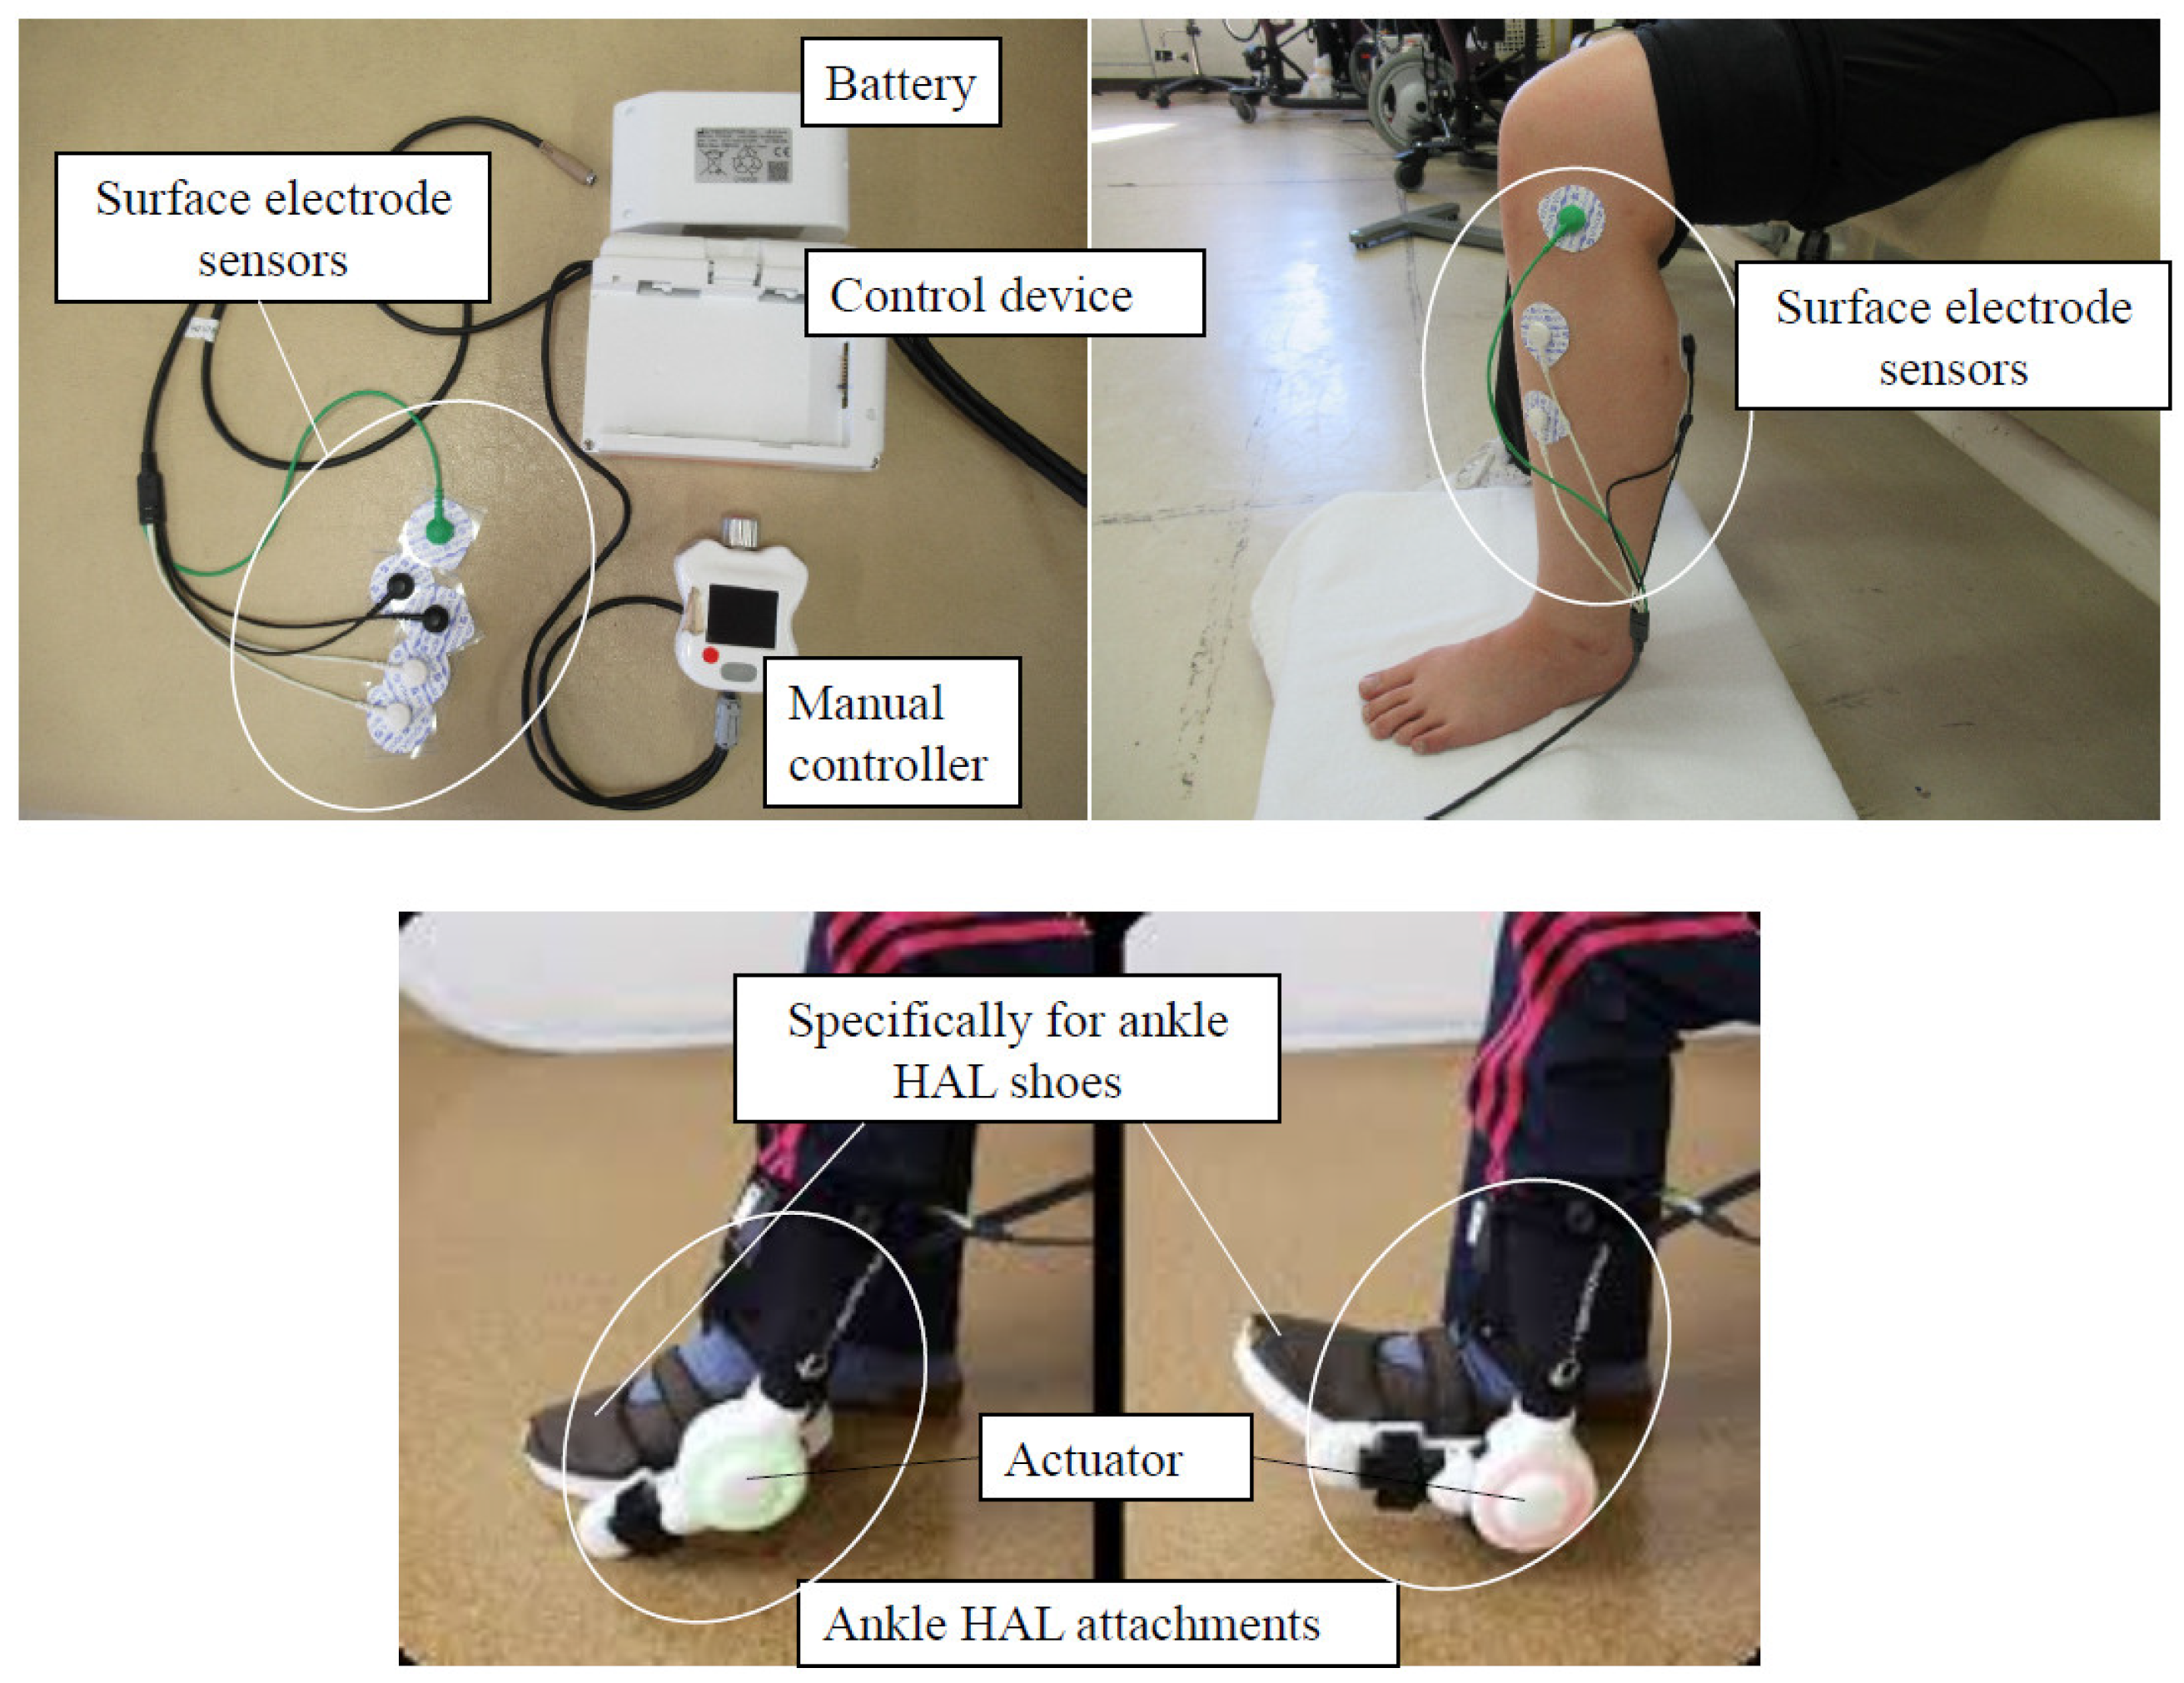 Functional electrical stimulation (FES) in orthopaedics